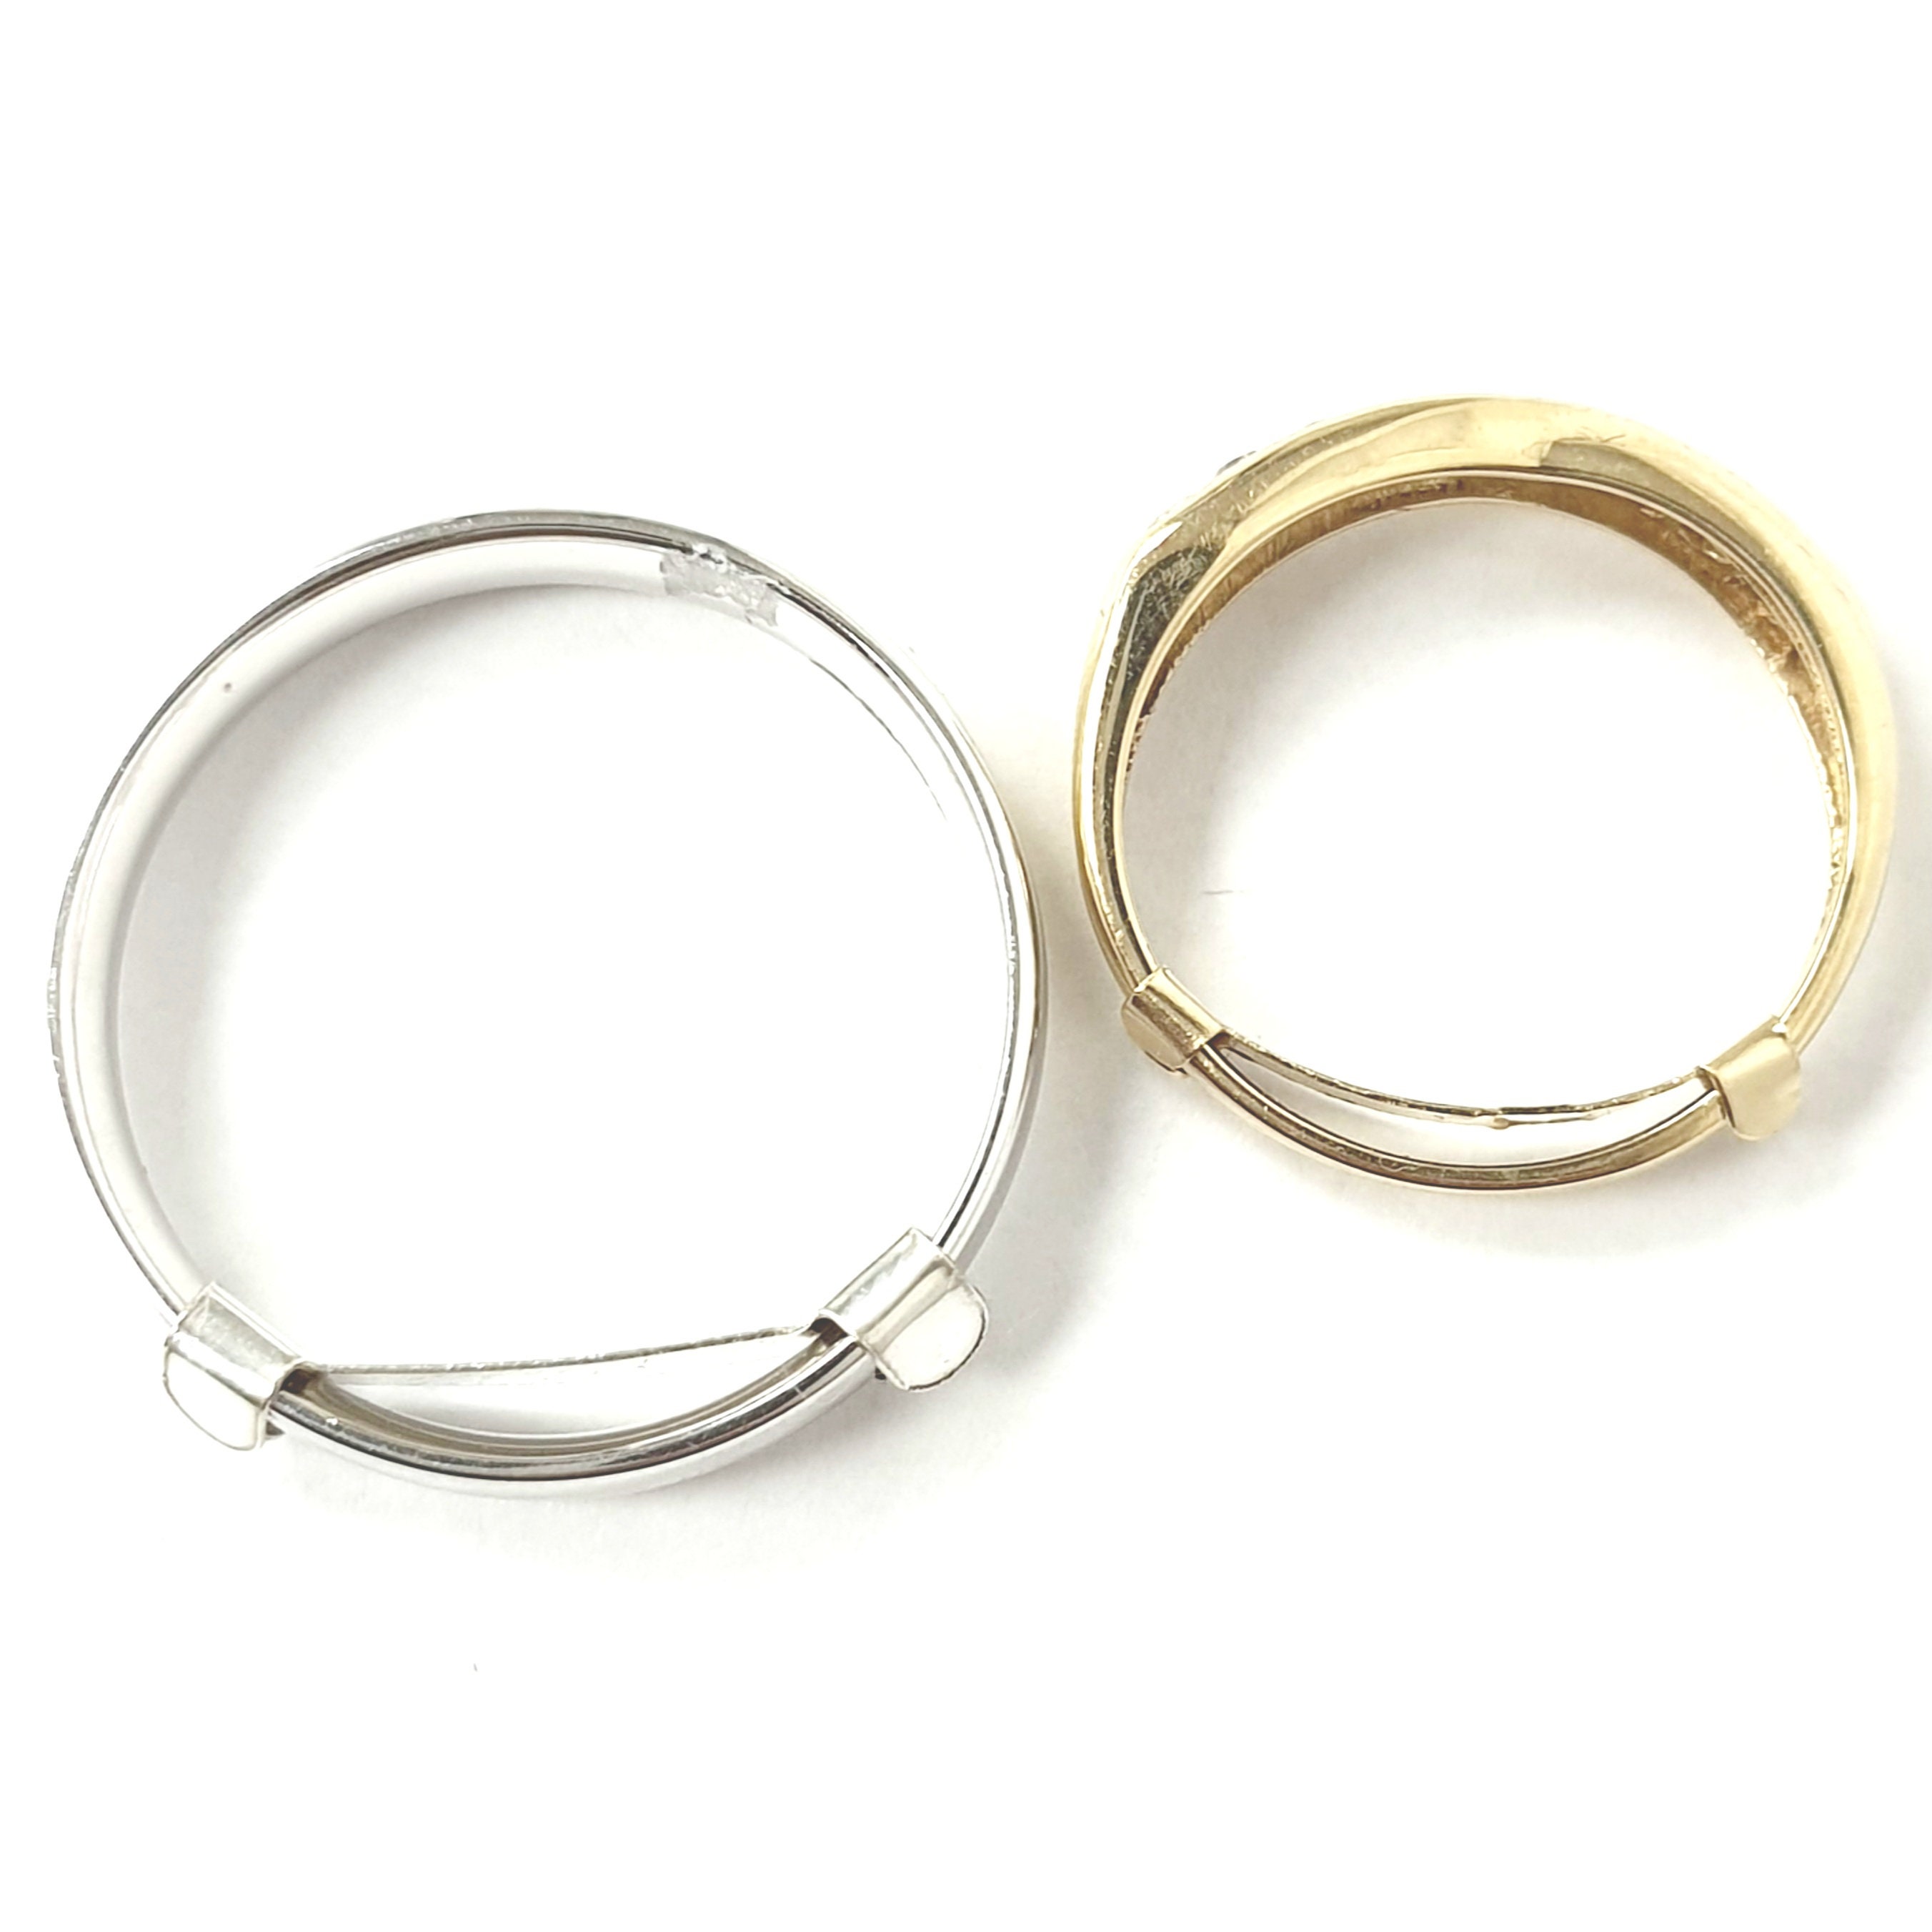 How to Size a Ring Using a Plastic Ring Guard 